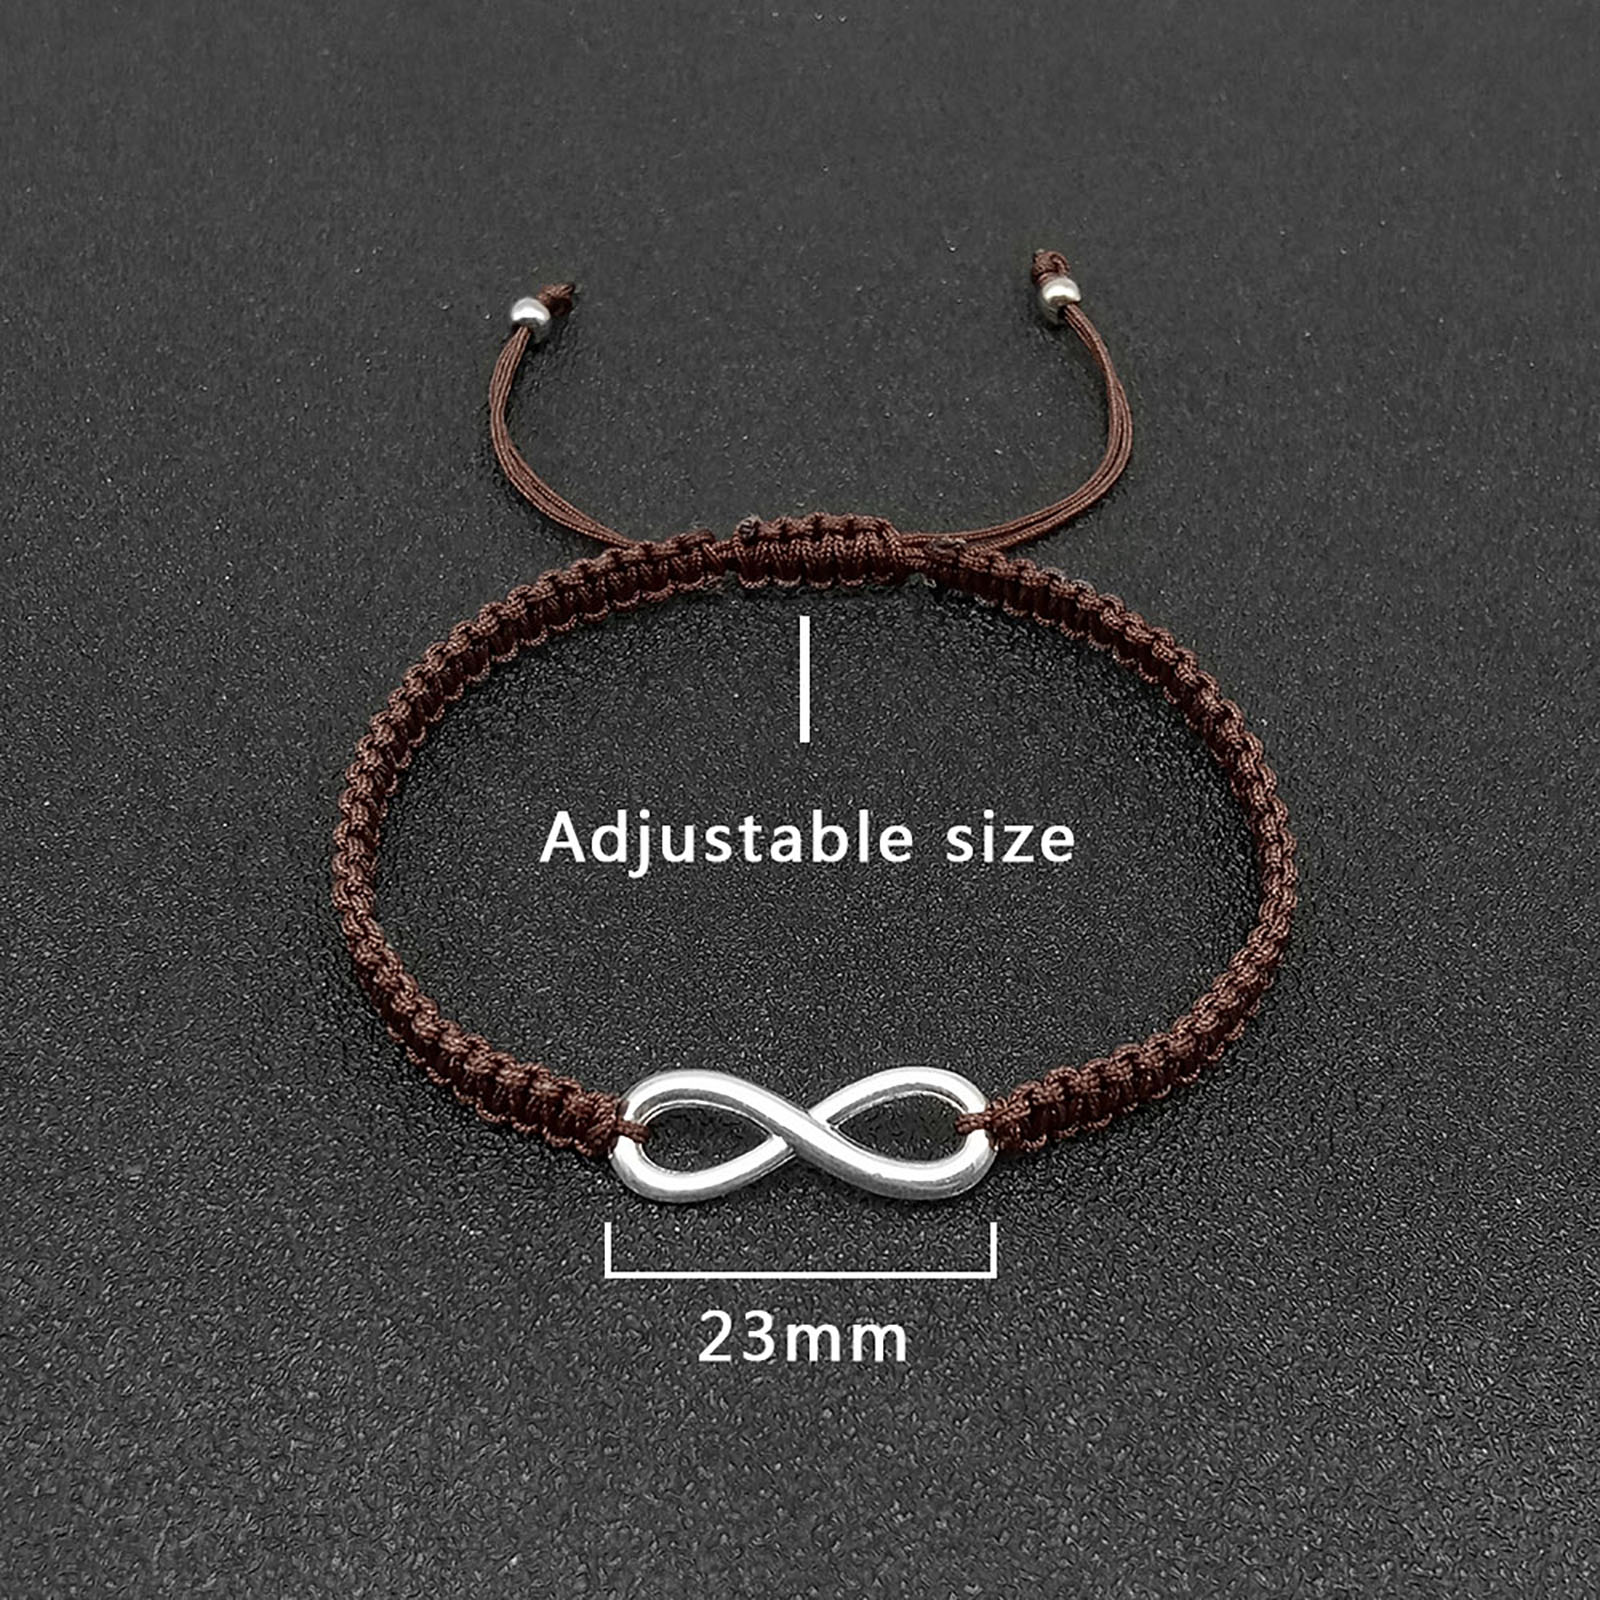 1:The symbol length is 23mm, and the size of the hand rope is adjustable